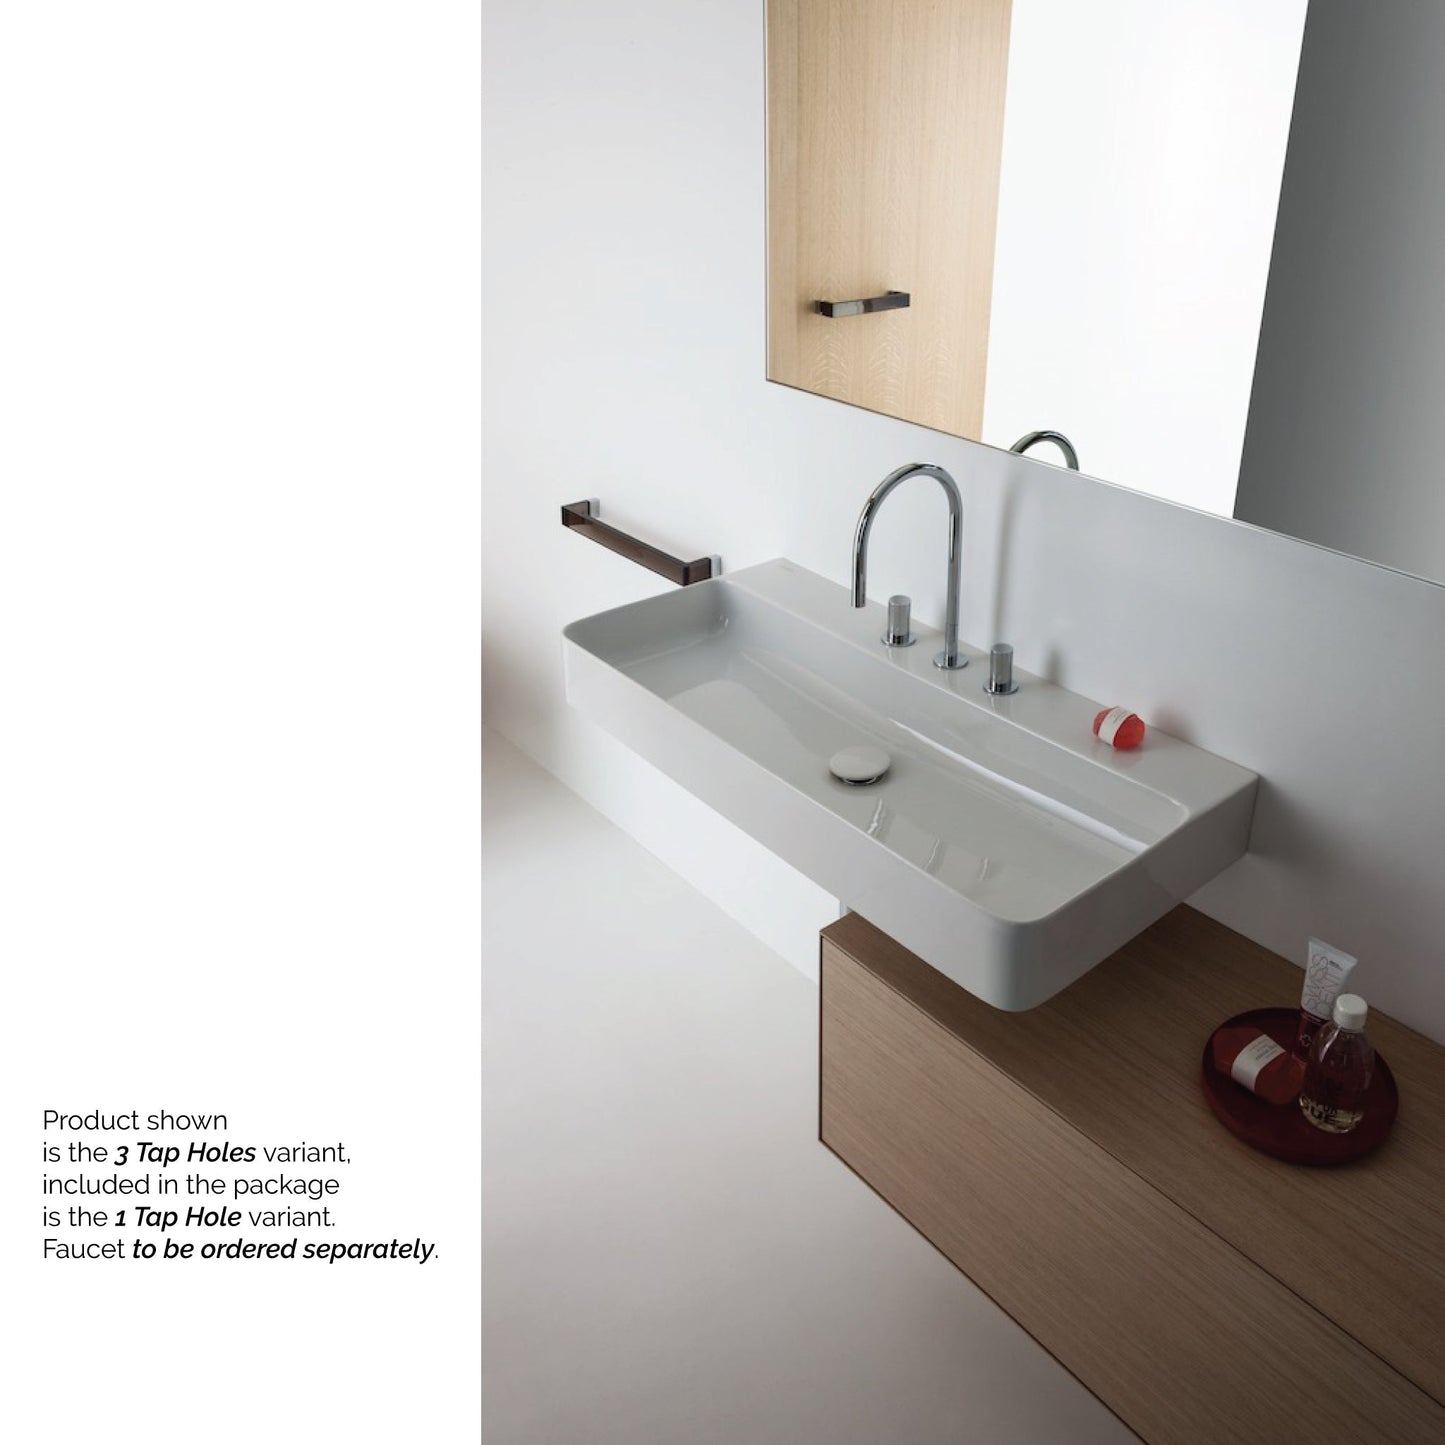 Laufen Val 30" x 17" White Ceramic Wall-Mounted Bathroom Sink With Faucet Hole